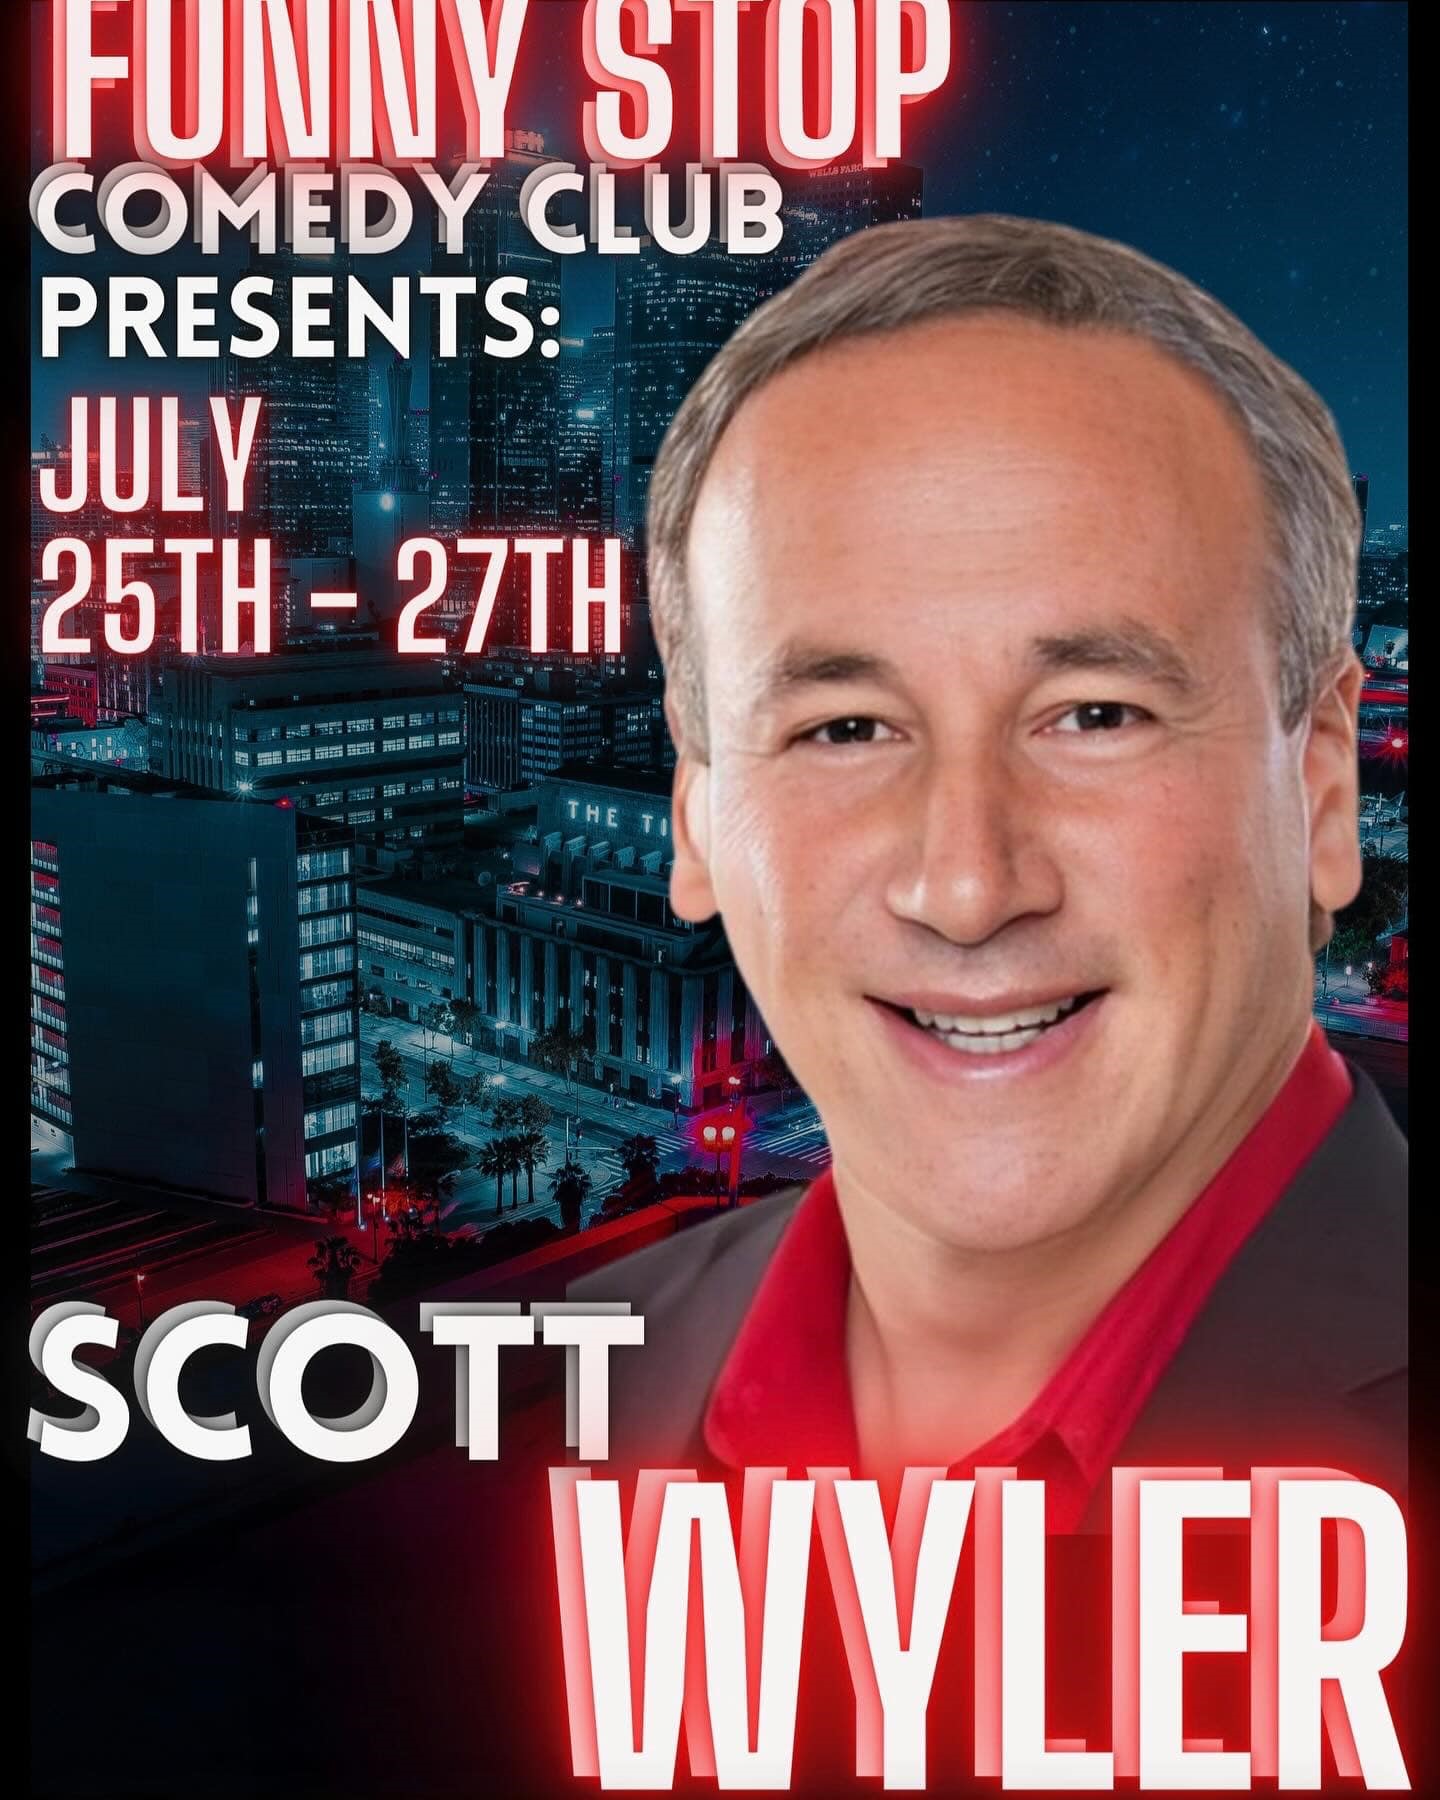 Scott Wyler - Fri. 9:30 PM Show Funny Stop Comedy Club on Jul 26, 21:30@Funny Stop Comedy Club - Buy tickets and Get information on Funny Stop funnystop.online